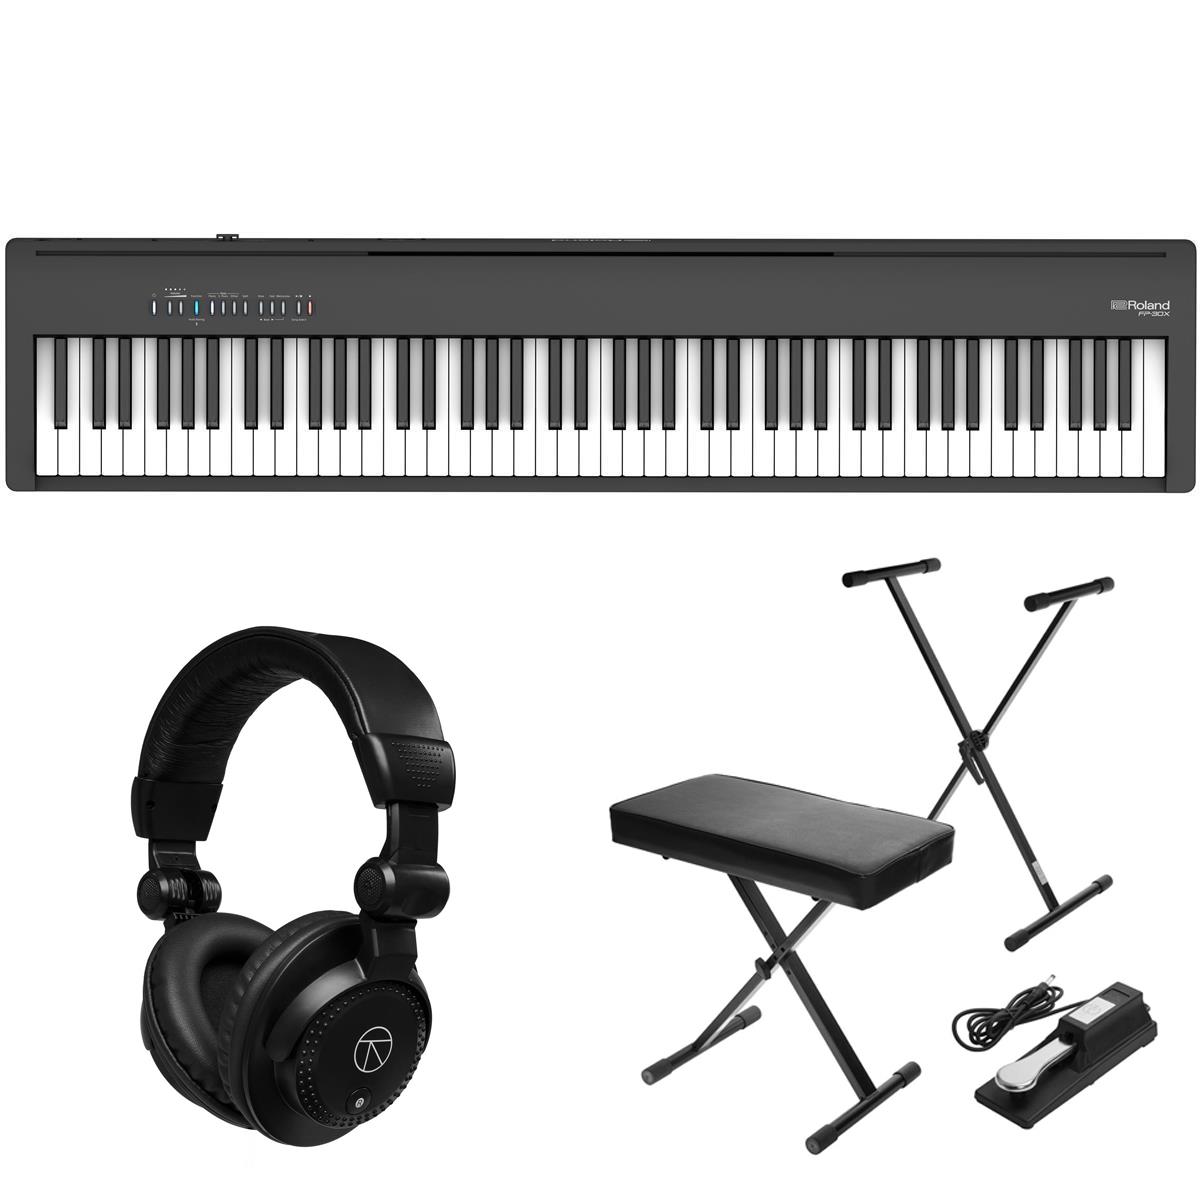 Roland FP-30X Portable Digital Piano, Black w/ Stand, Bench, Pedal & Headphones $569 + free s/h